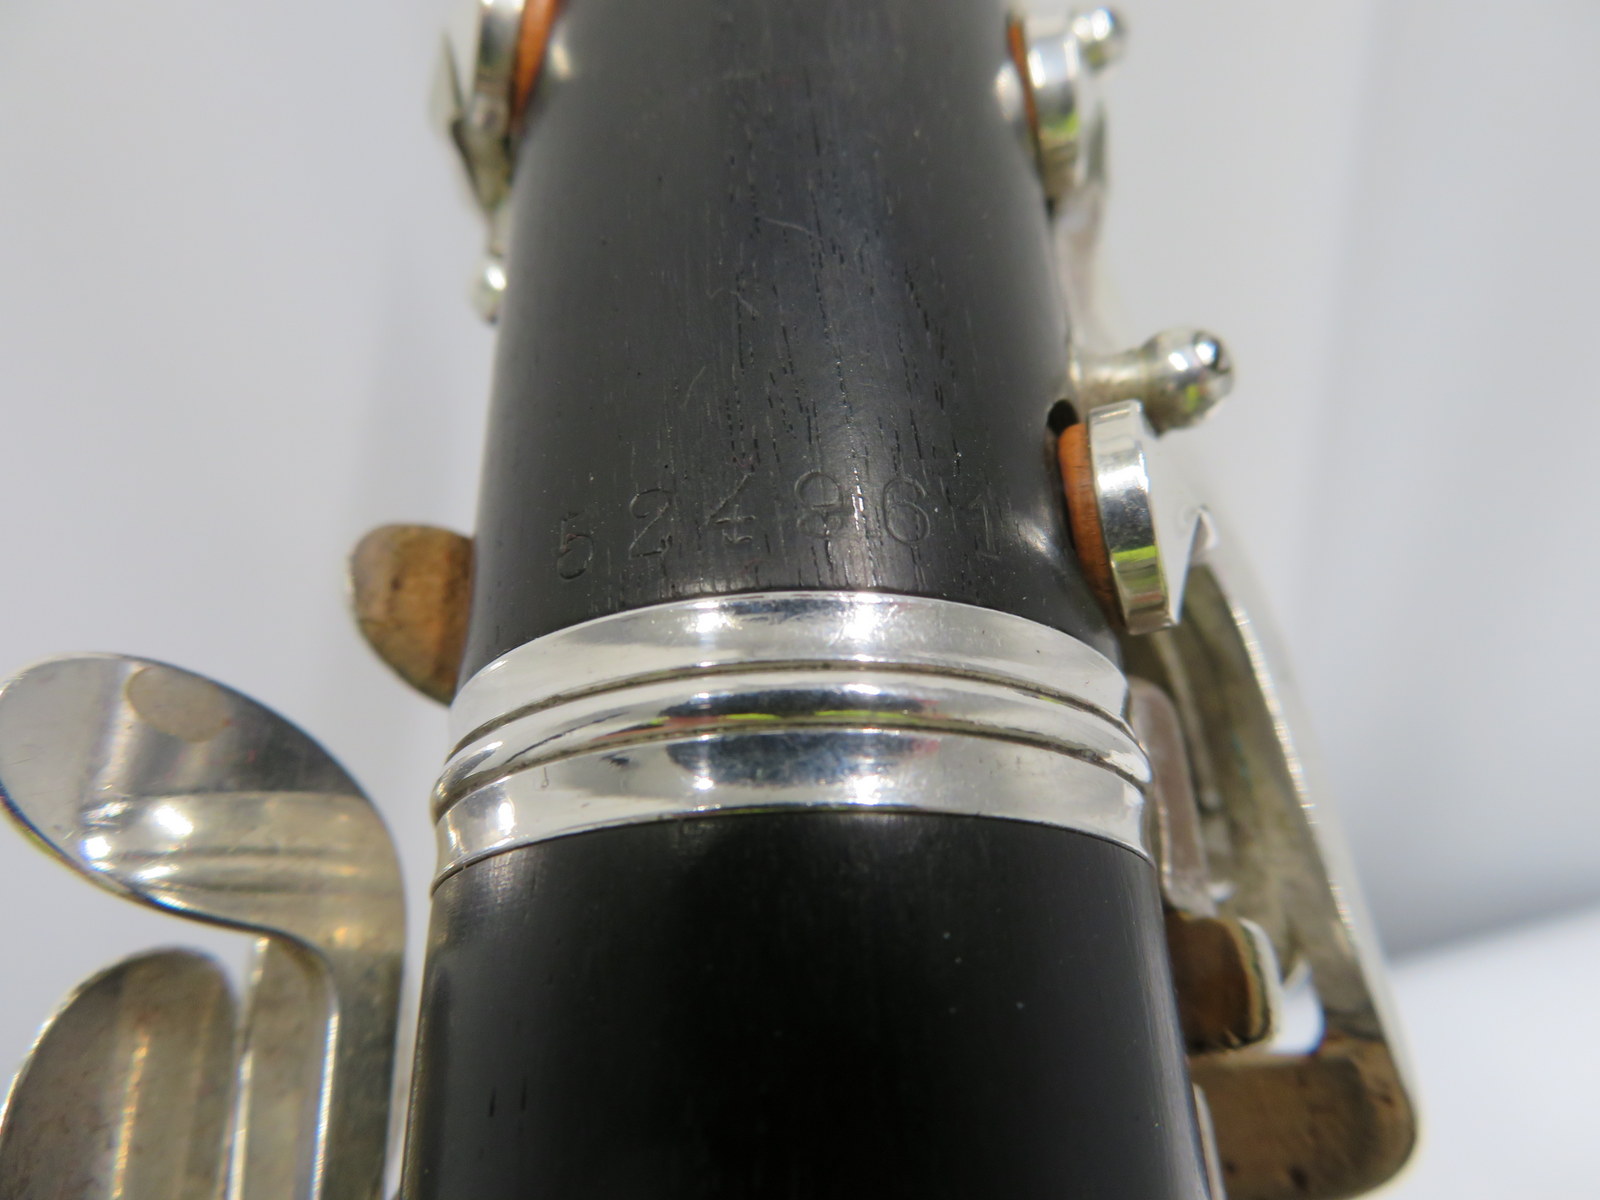 Buffet Crampon R13 clarinet with case. Serial number: 524961. - Image 13 of 17